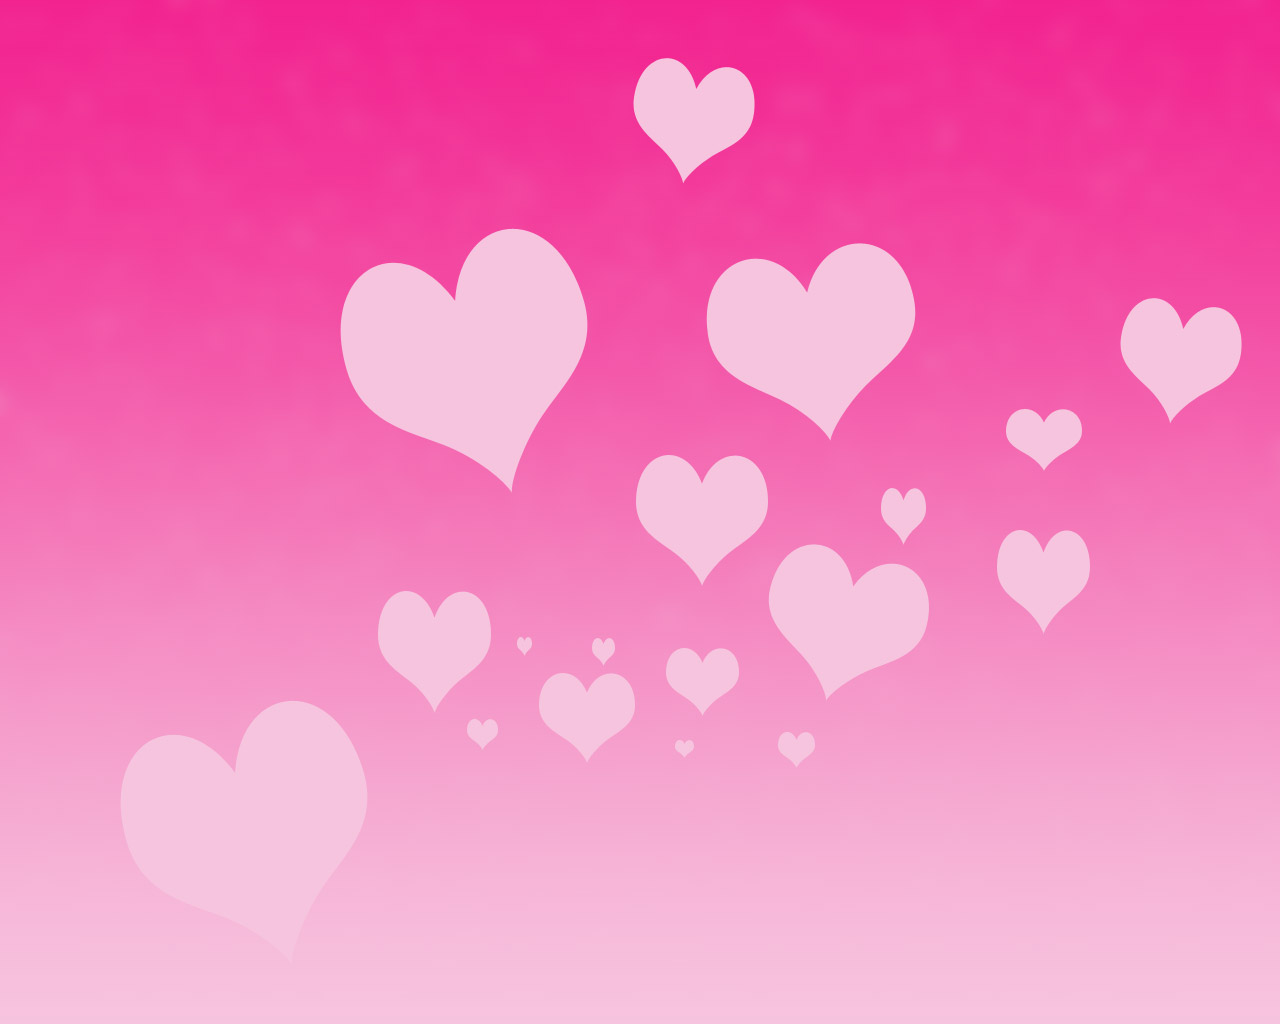 Heart Store Paper Floating Hearts Wallpaper Background